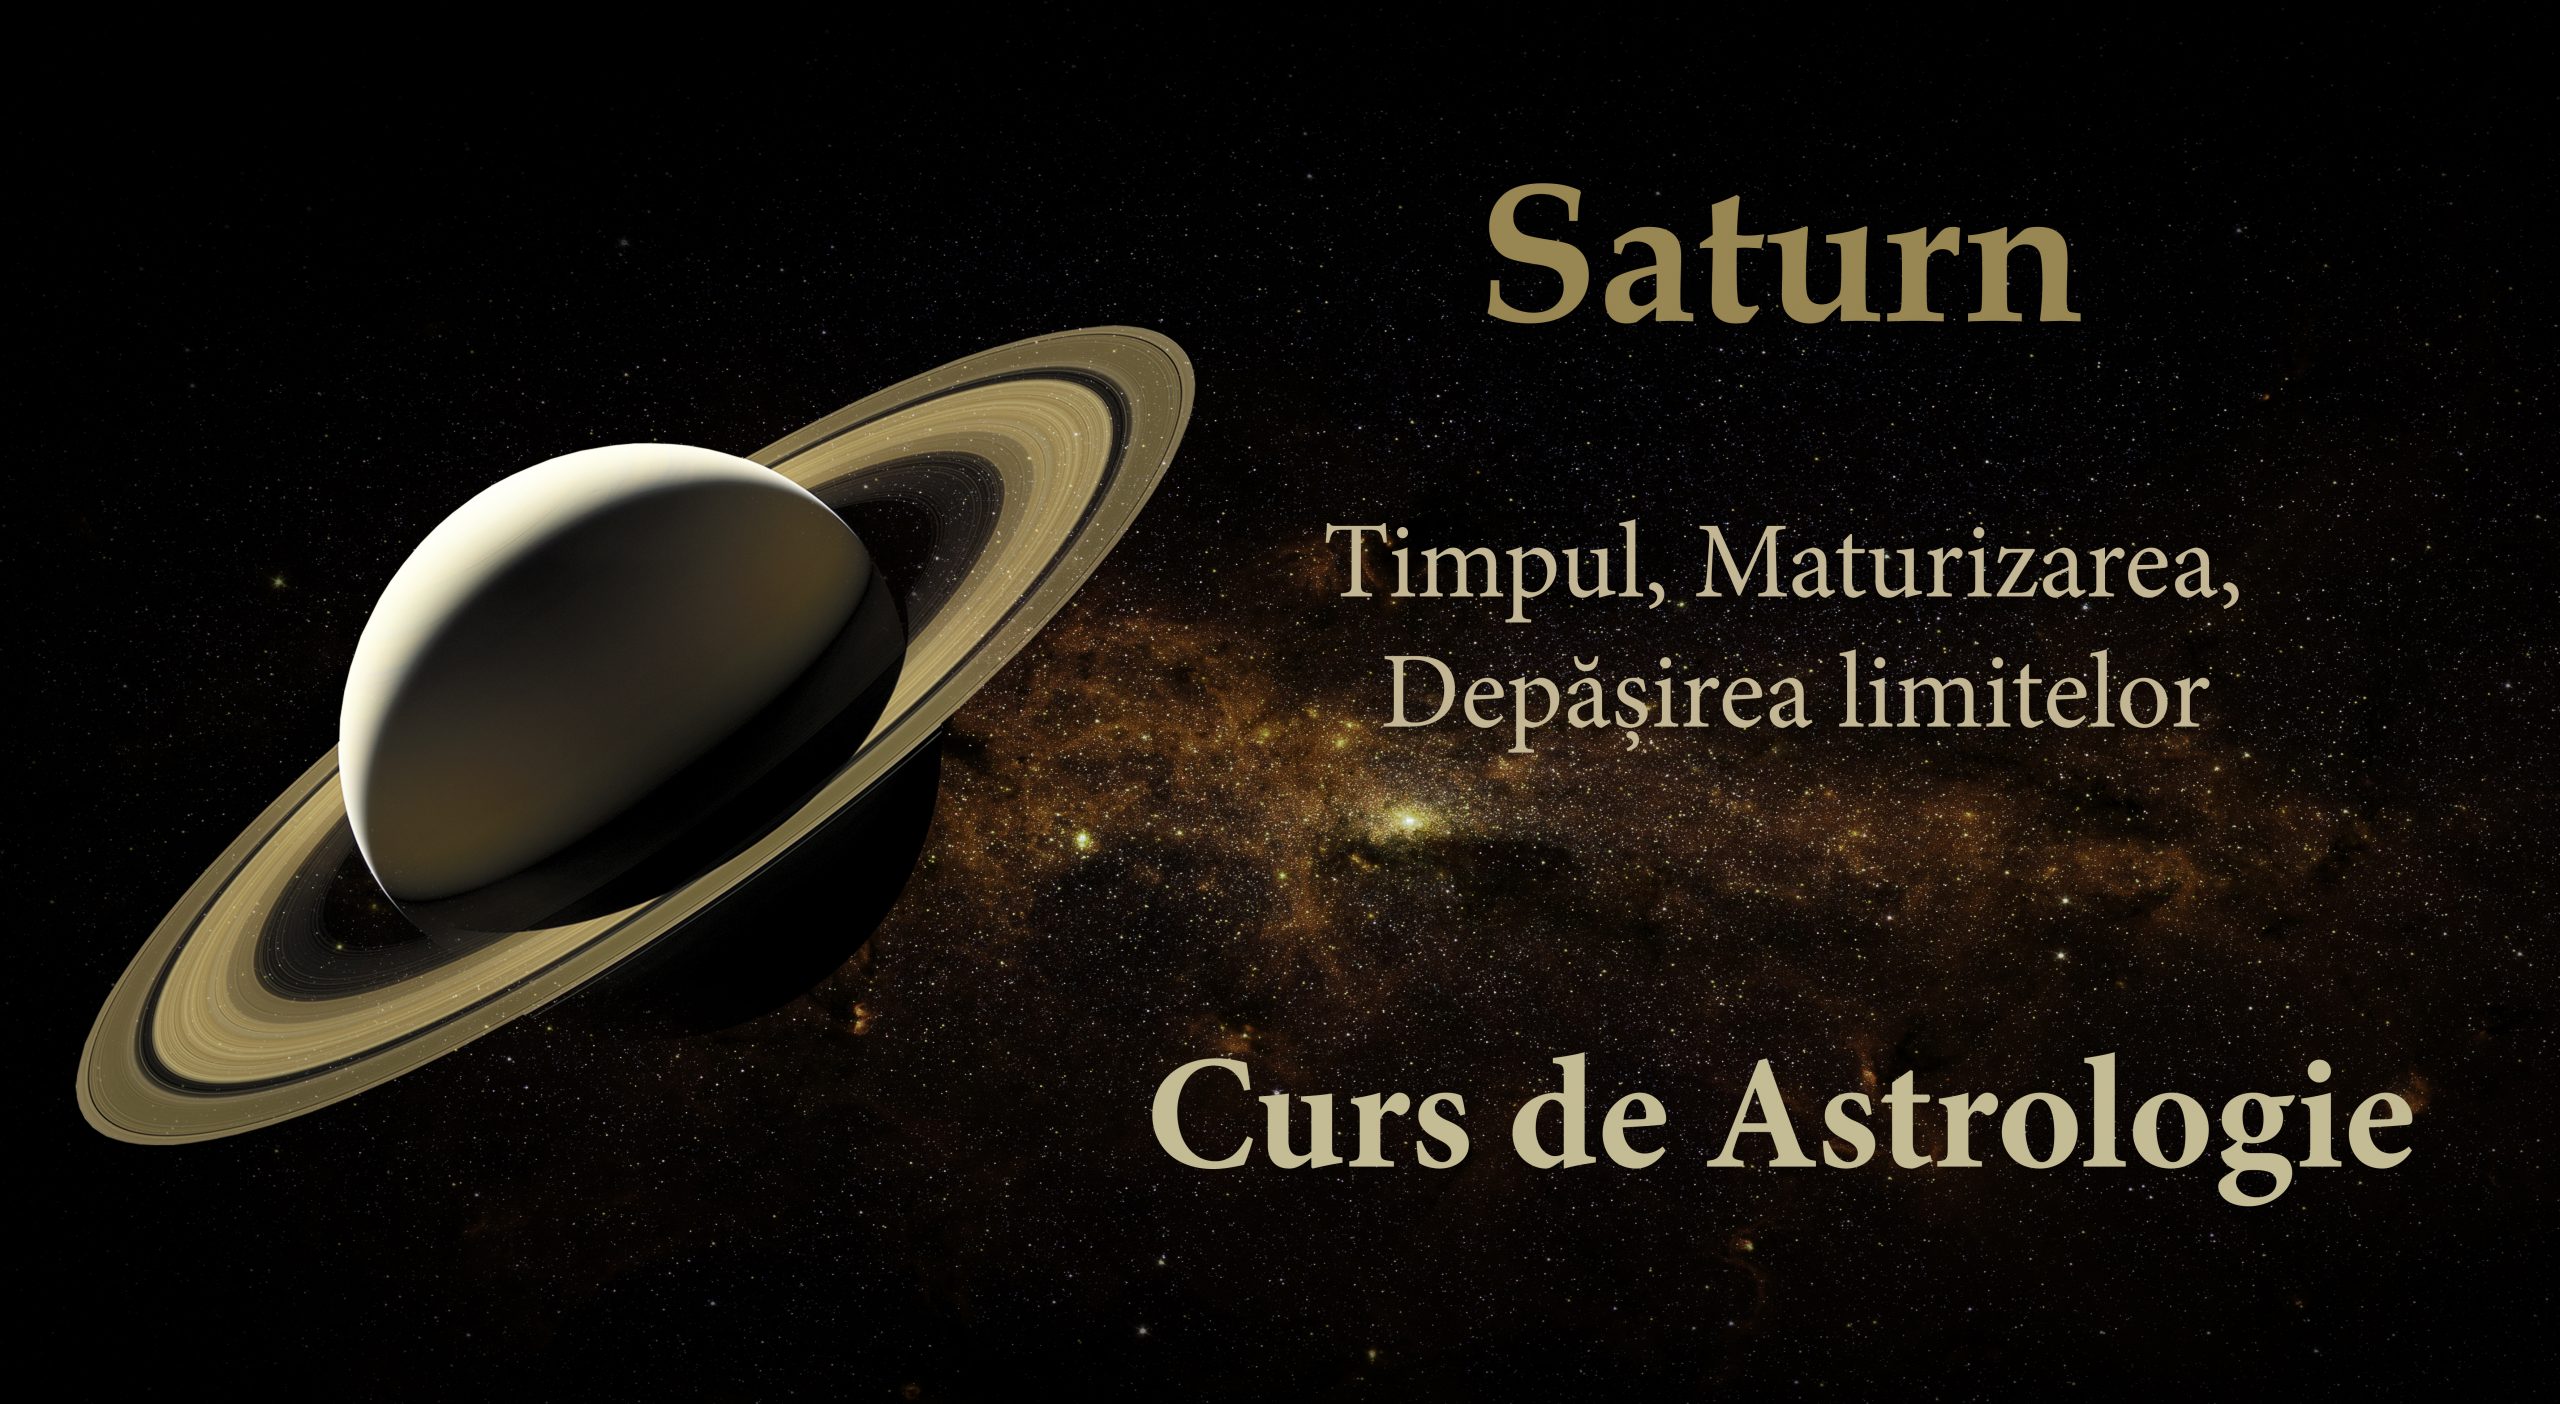 Saturn on space background. Elements of this image furnished by